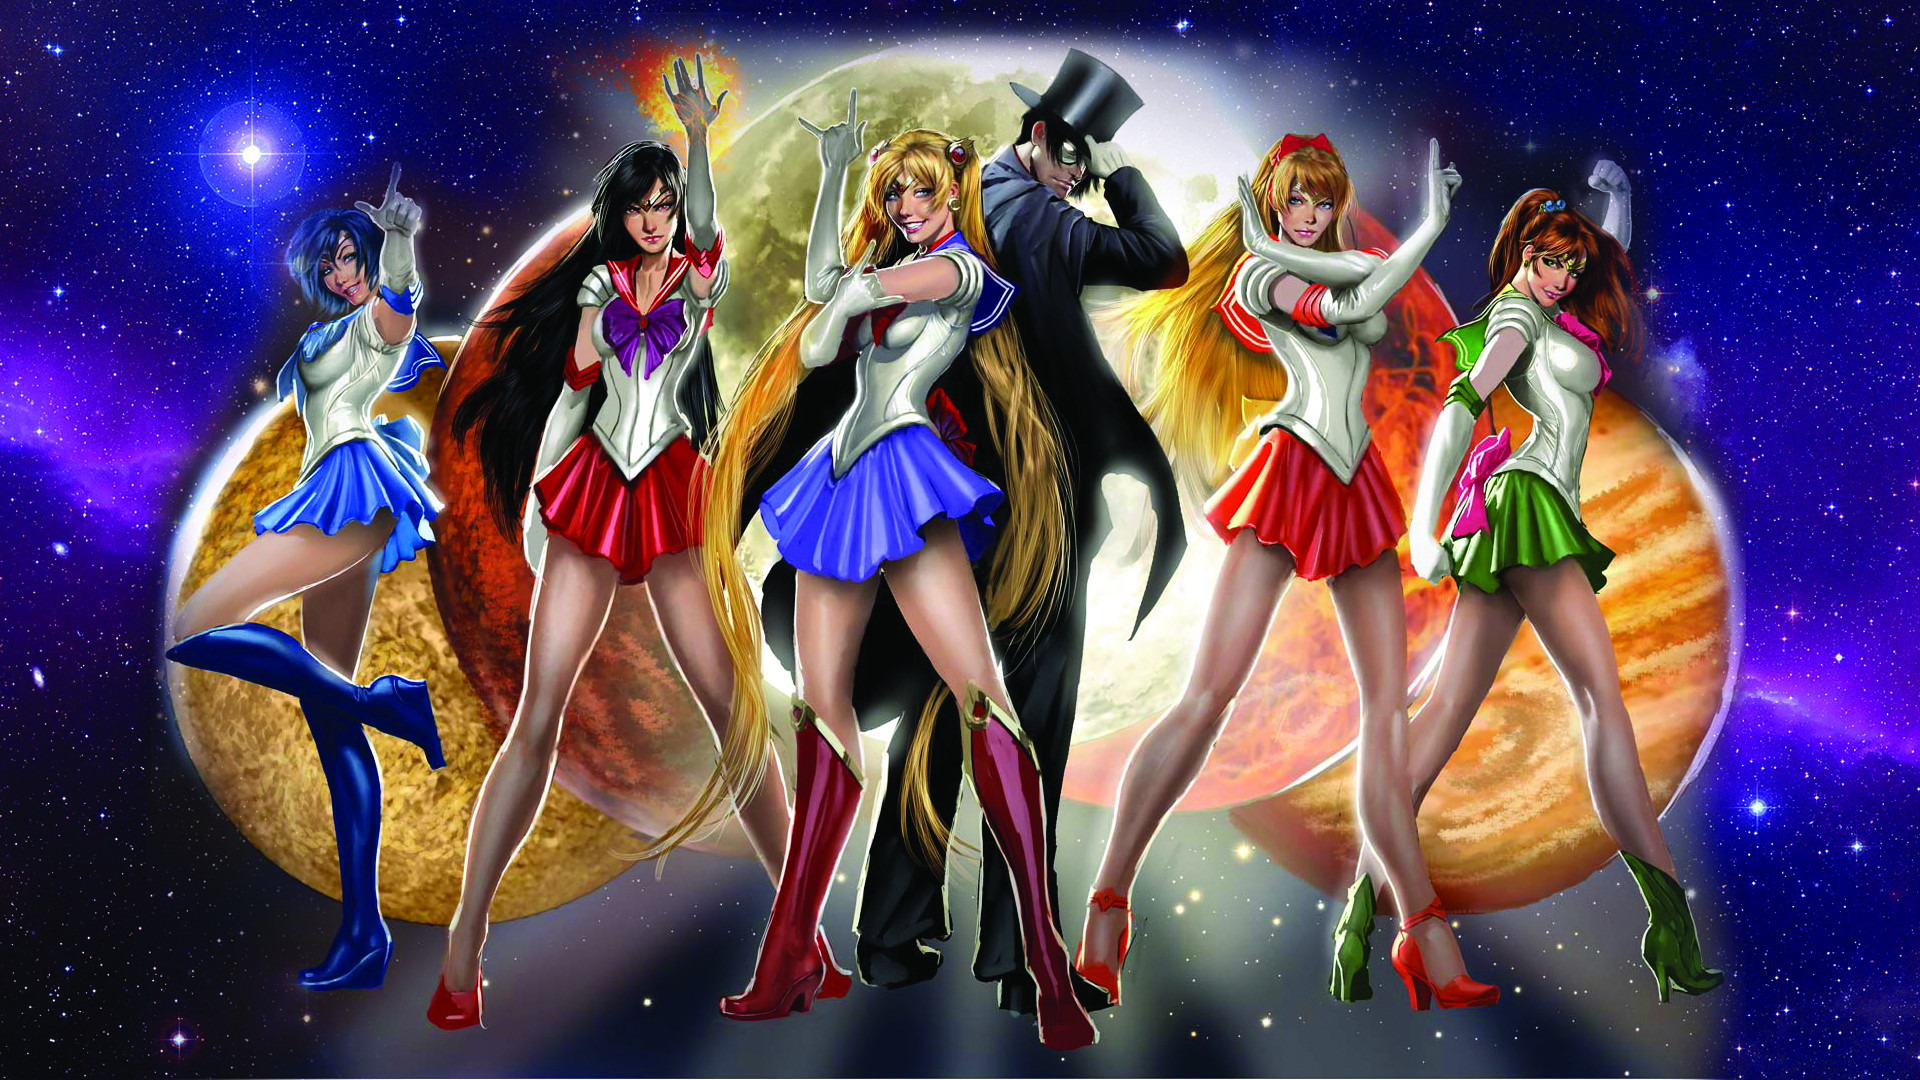 Sailor Moon HD Wallpapers – Wallpaper, High Definition, High Quality